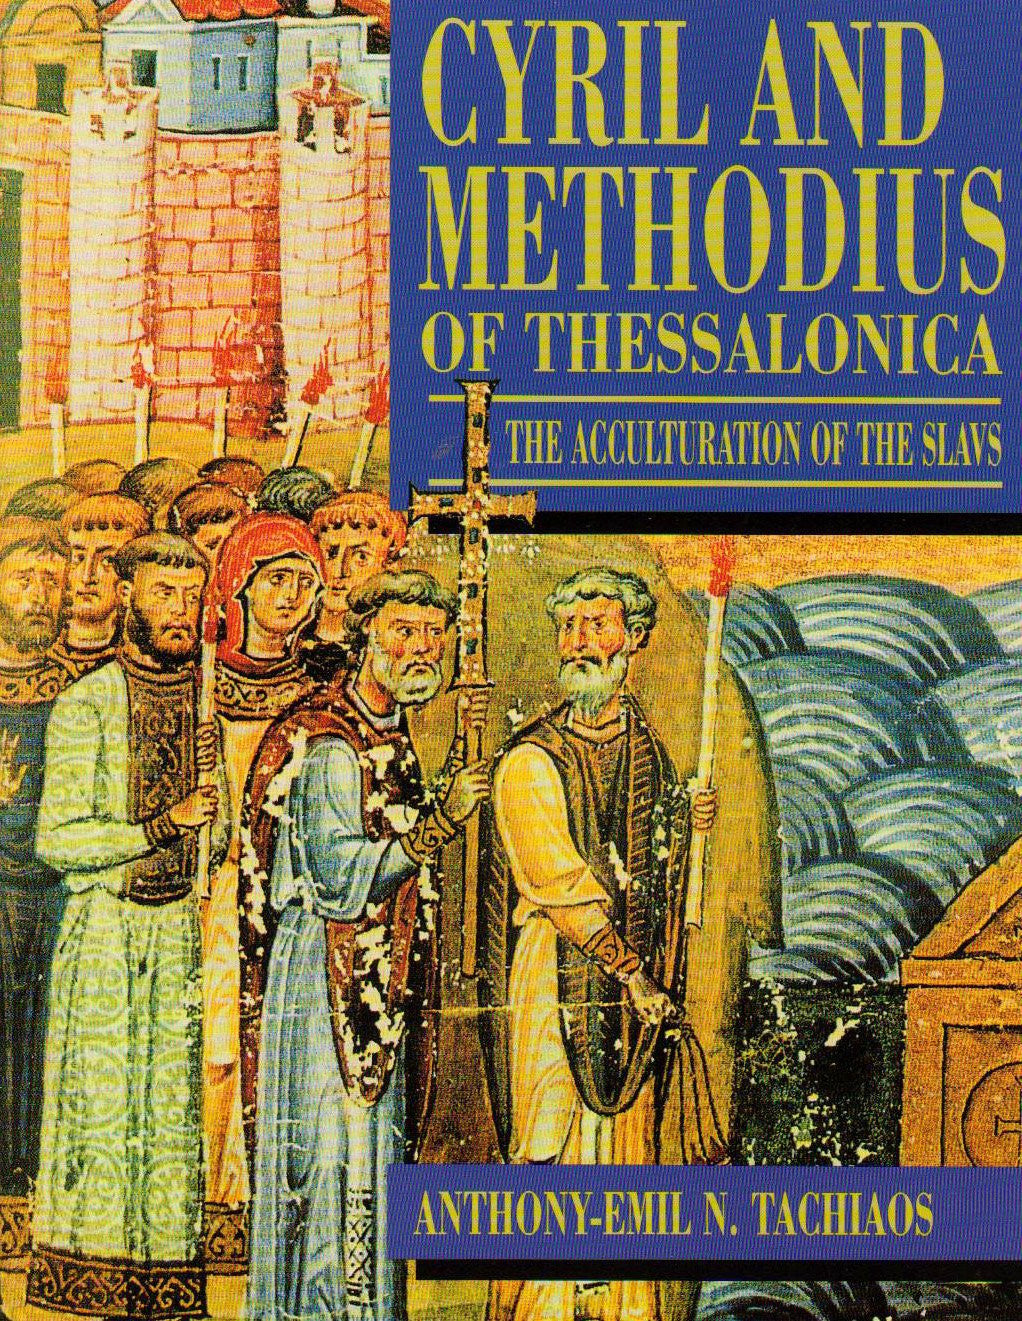 Cyril and Methodius of Thessalonica: The Acculturation of the Slavs